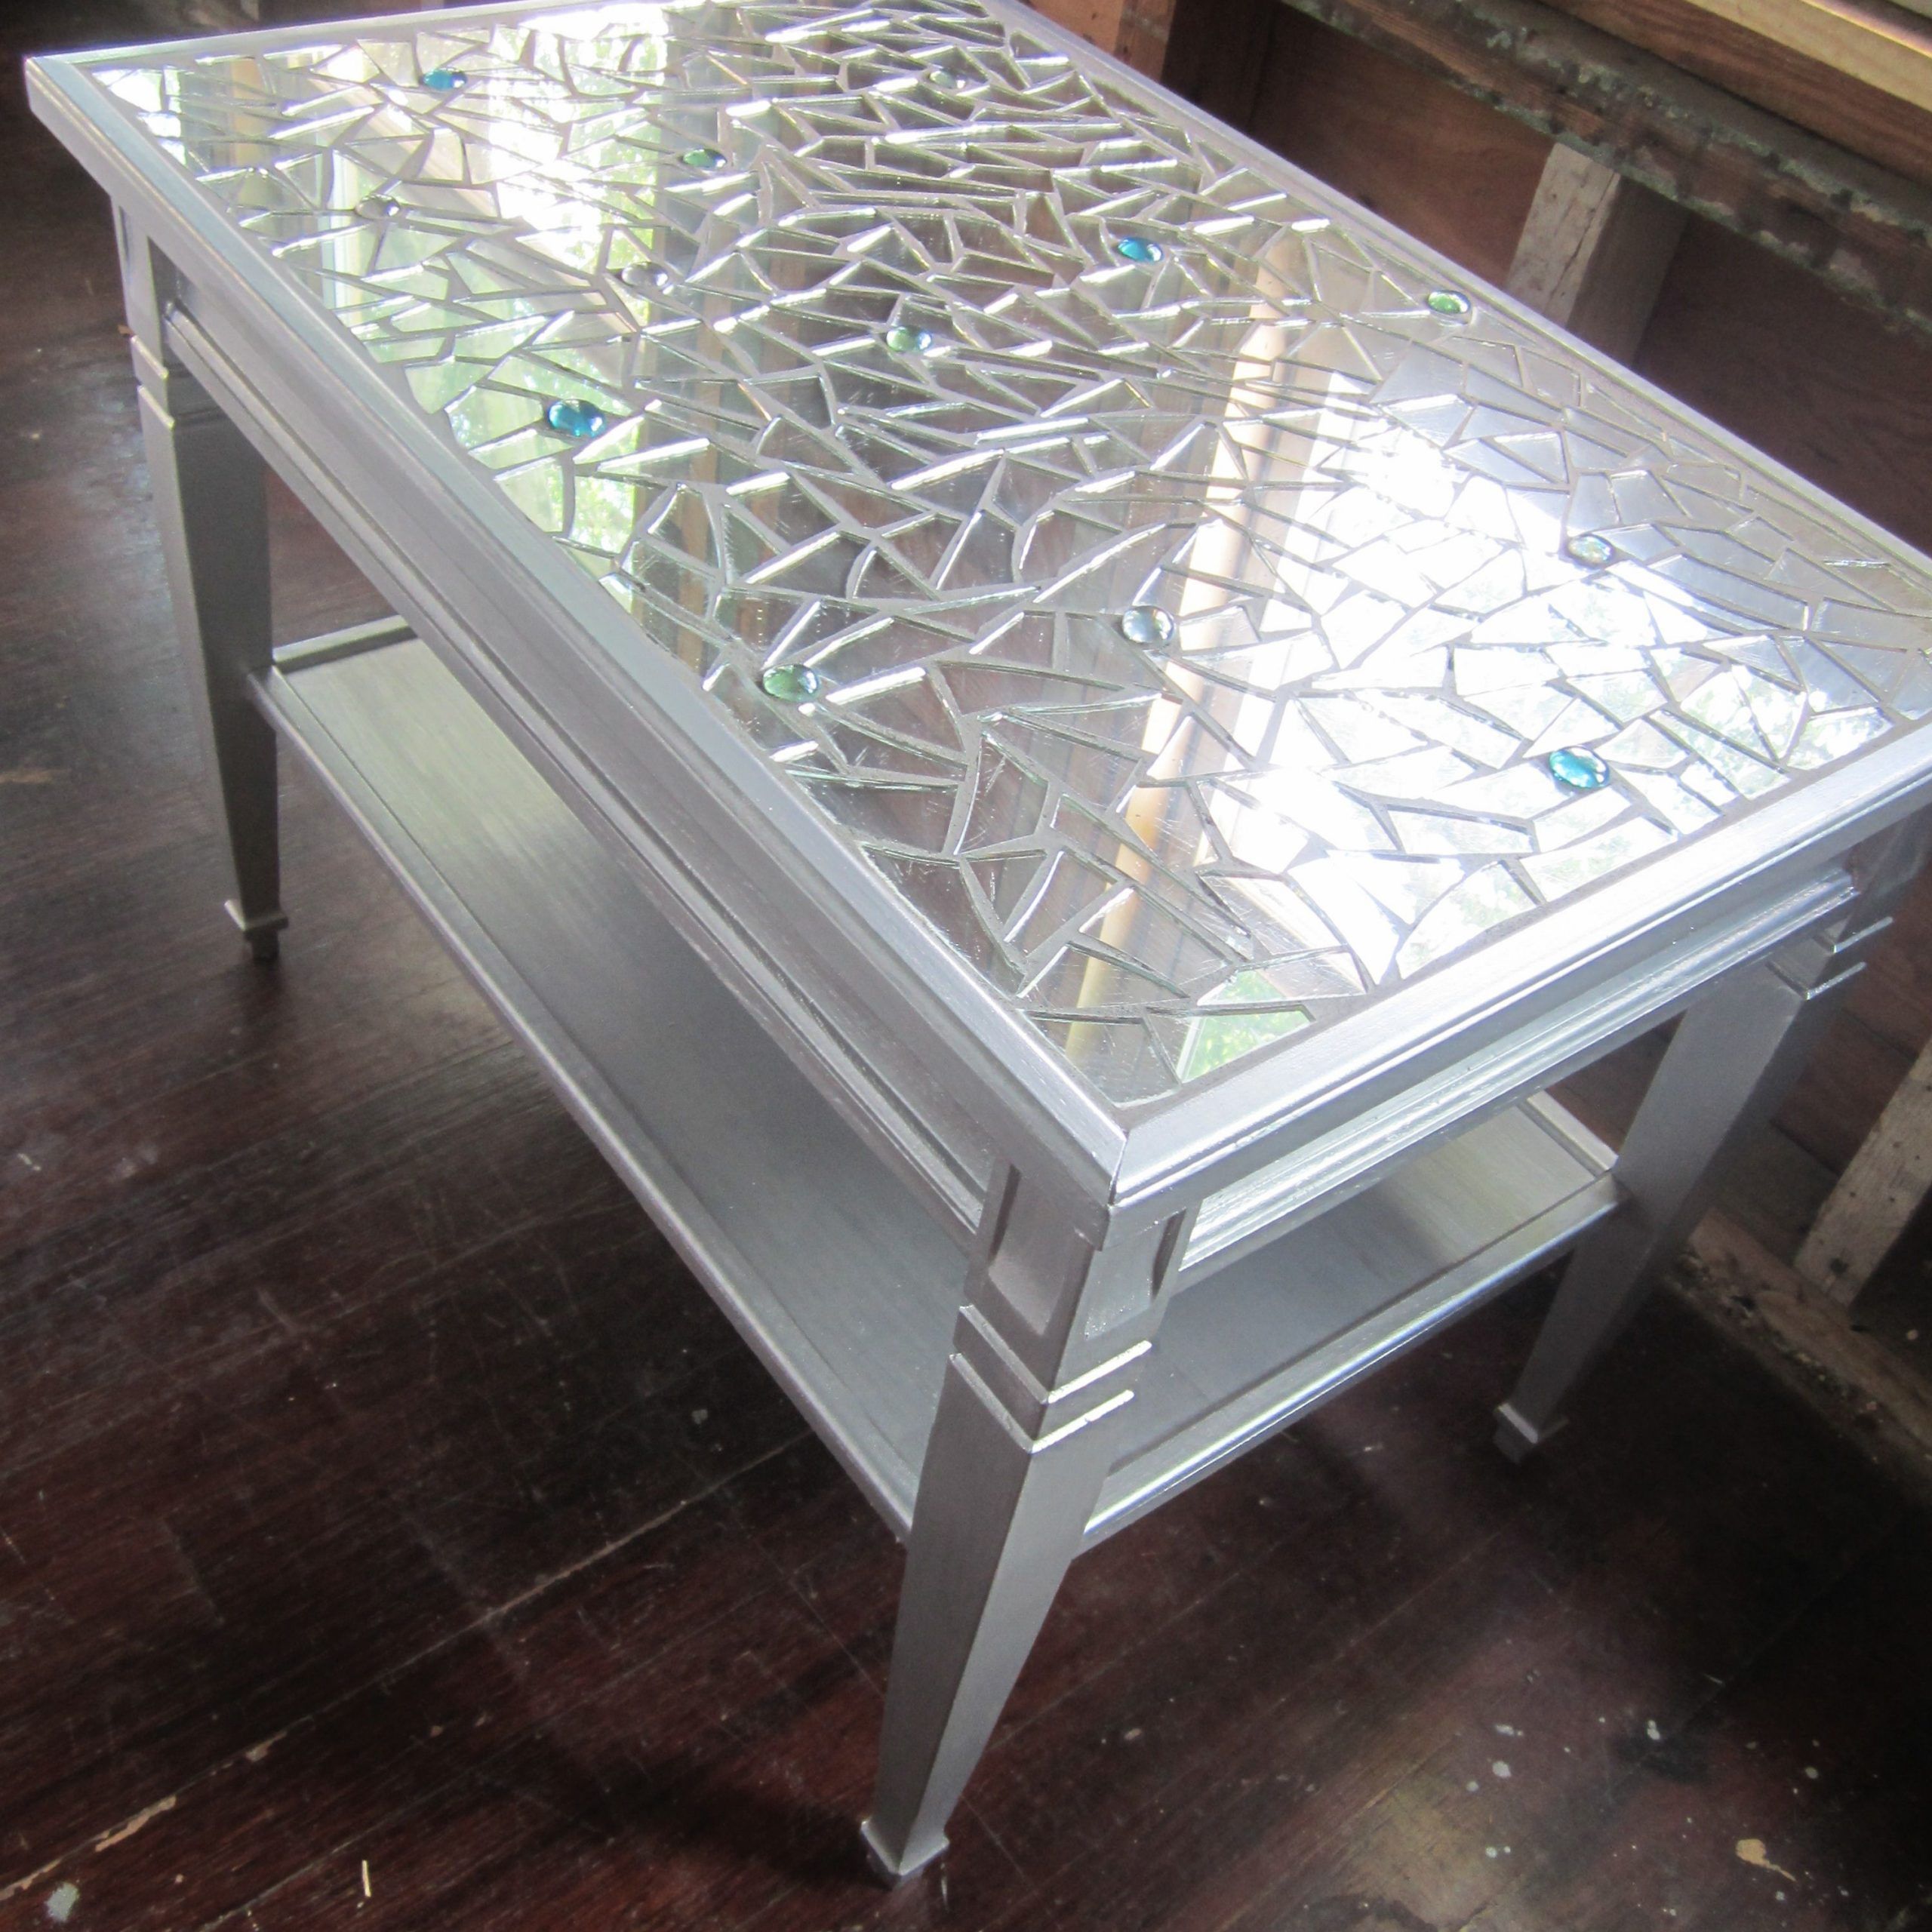 Most Recent Antique Silver Metal Coffee Tables Within Mosaic Mirror Metallic Silver Coffee Table Or Side Table (View 10 of 20)